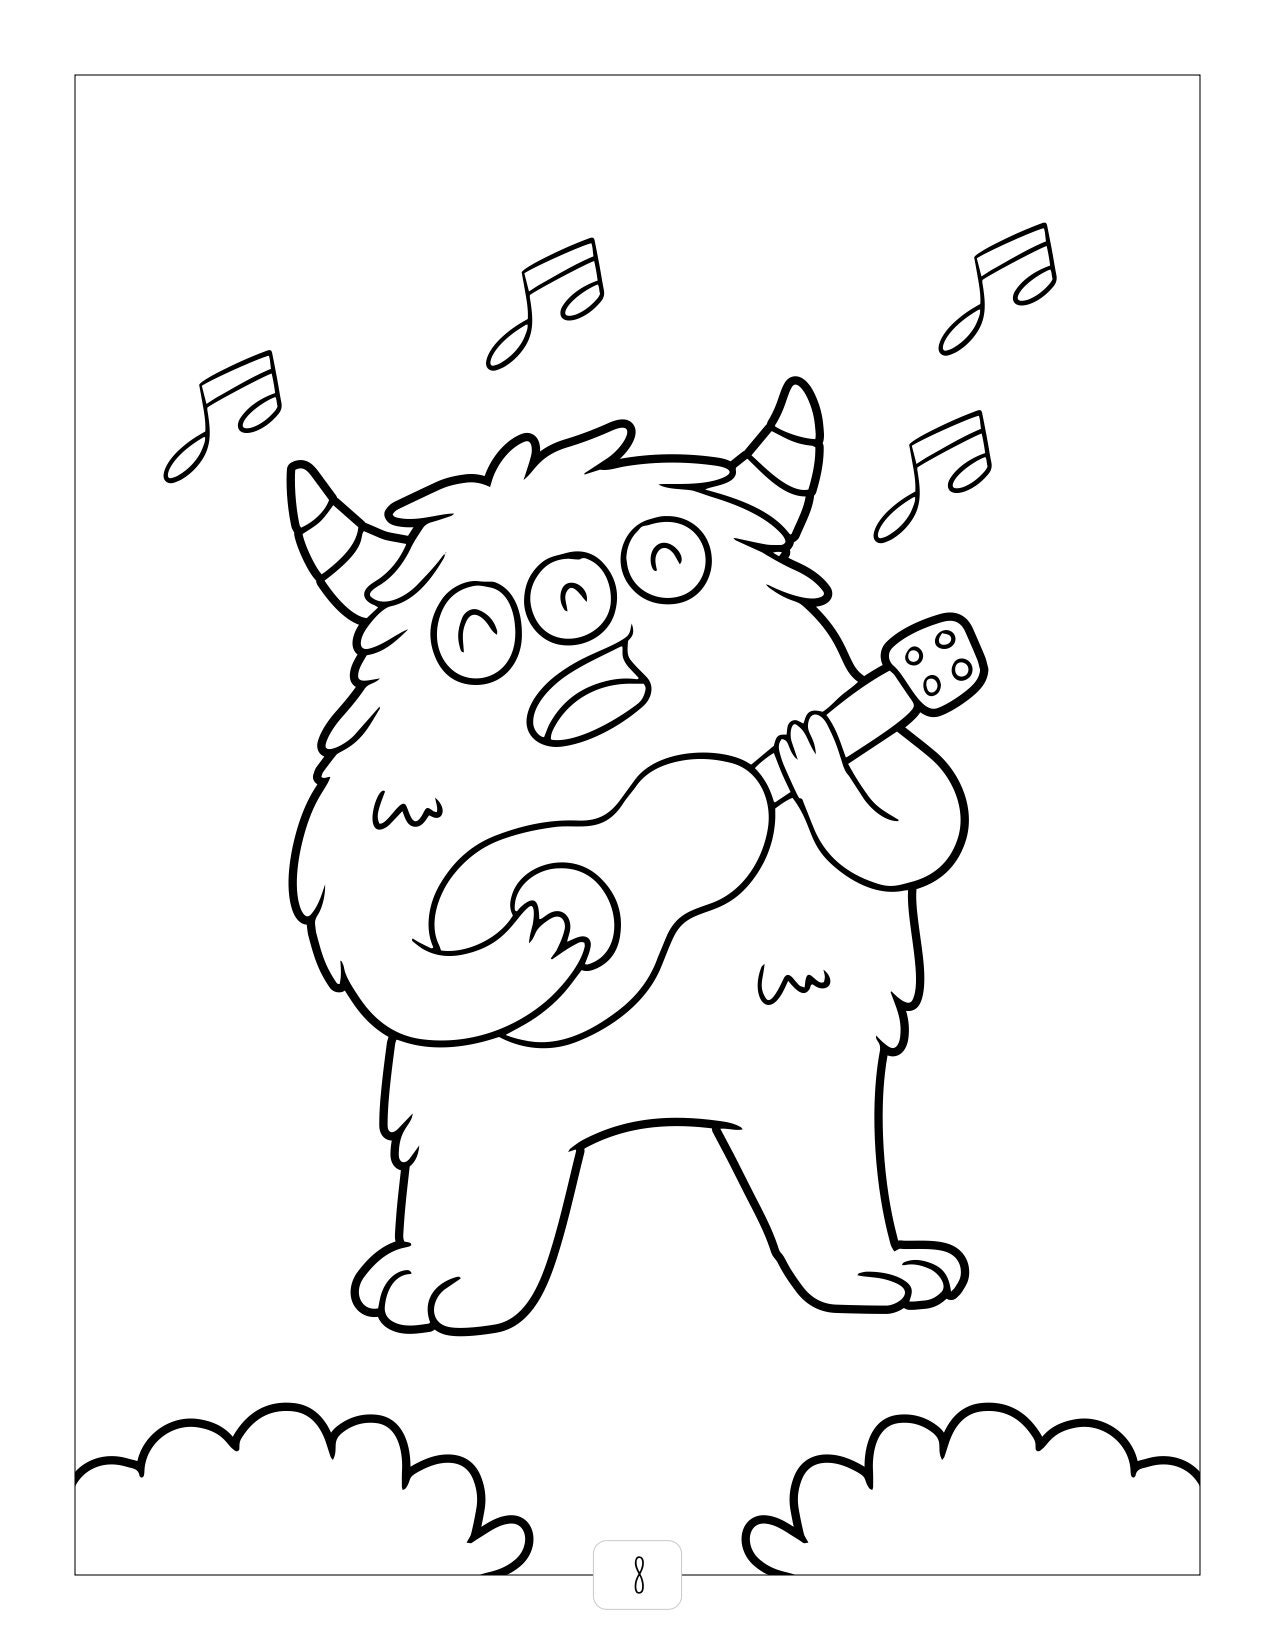 Coloring Pages my singing monsters 82 – Coloring Pages